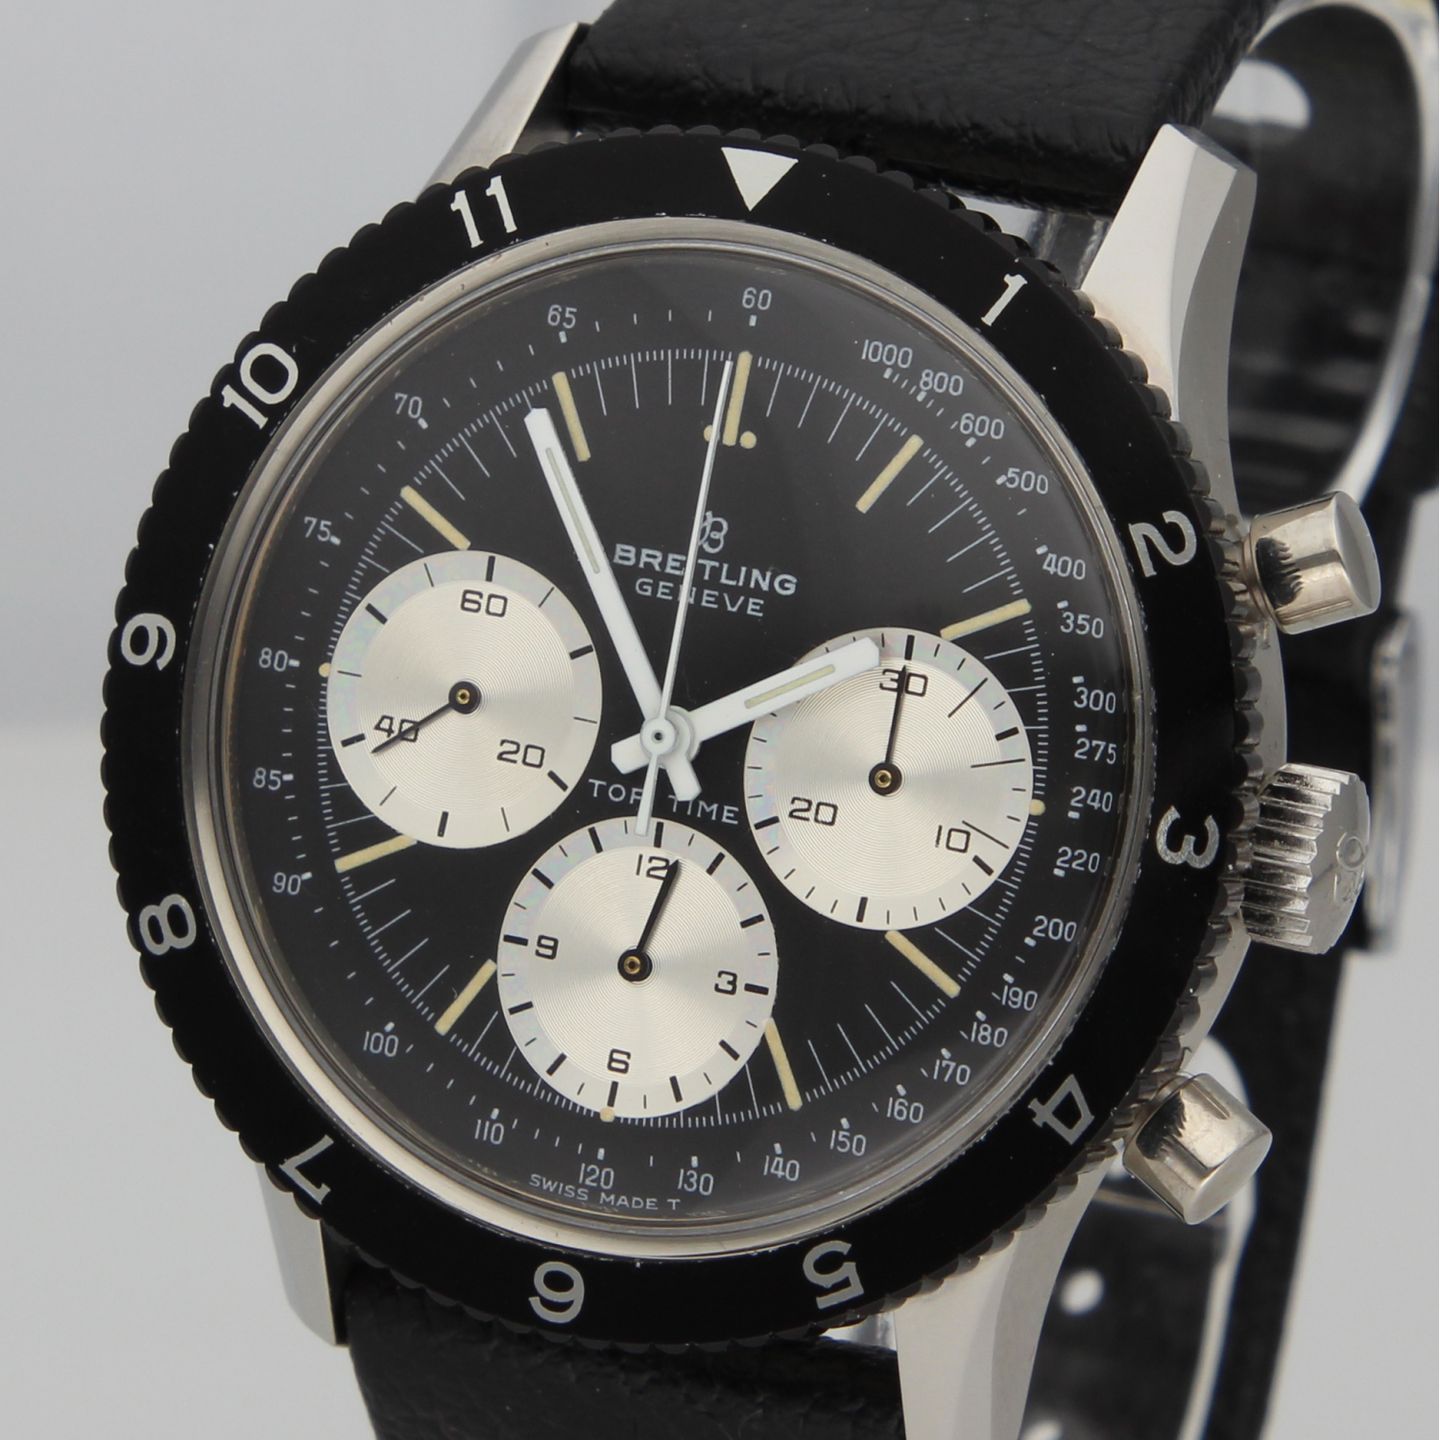 Breitling Top Time 7656 - (1/8)